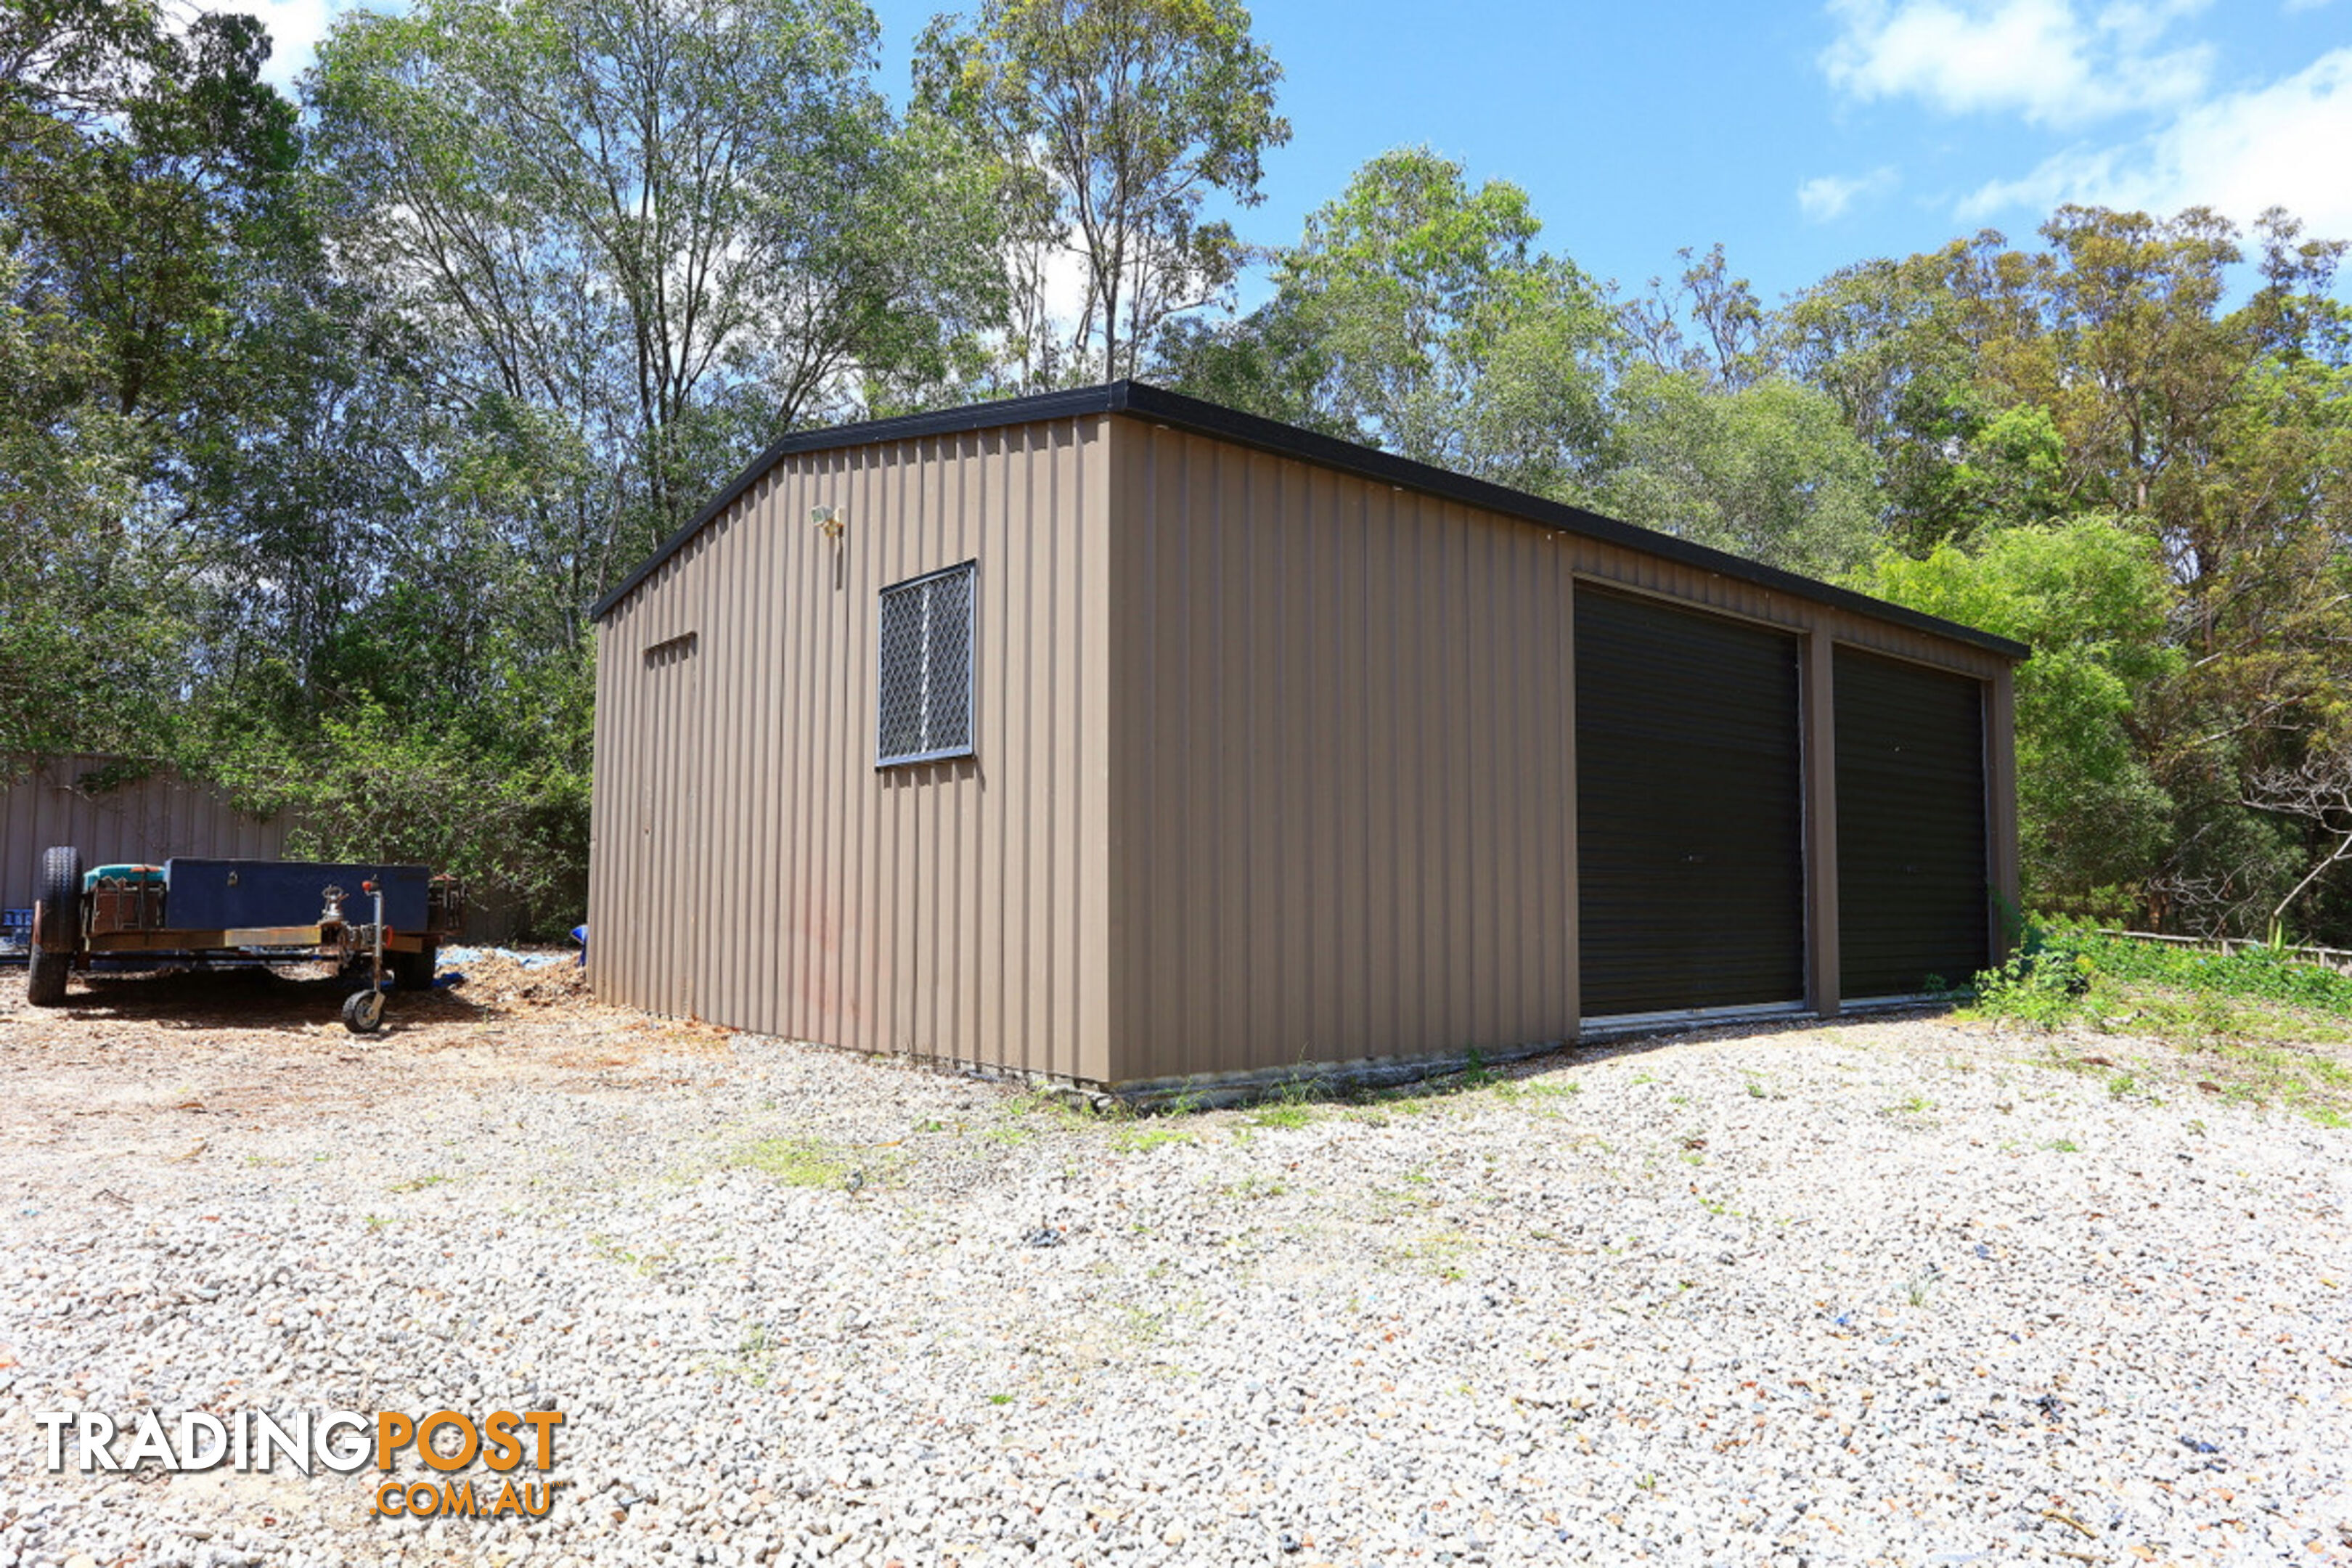 54 Mountain View Crest MOUNT NATHAN QLD 4211